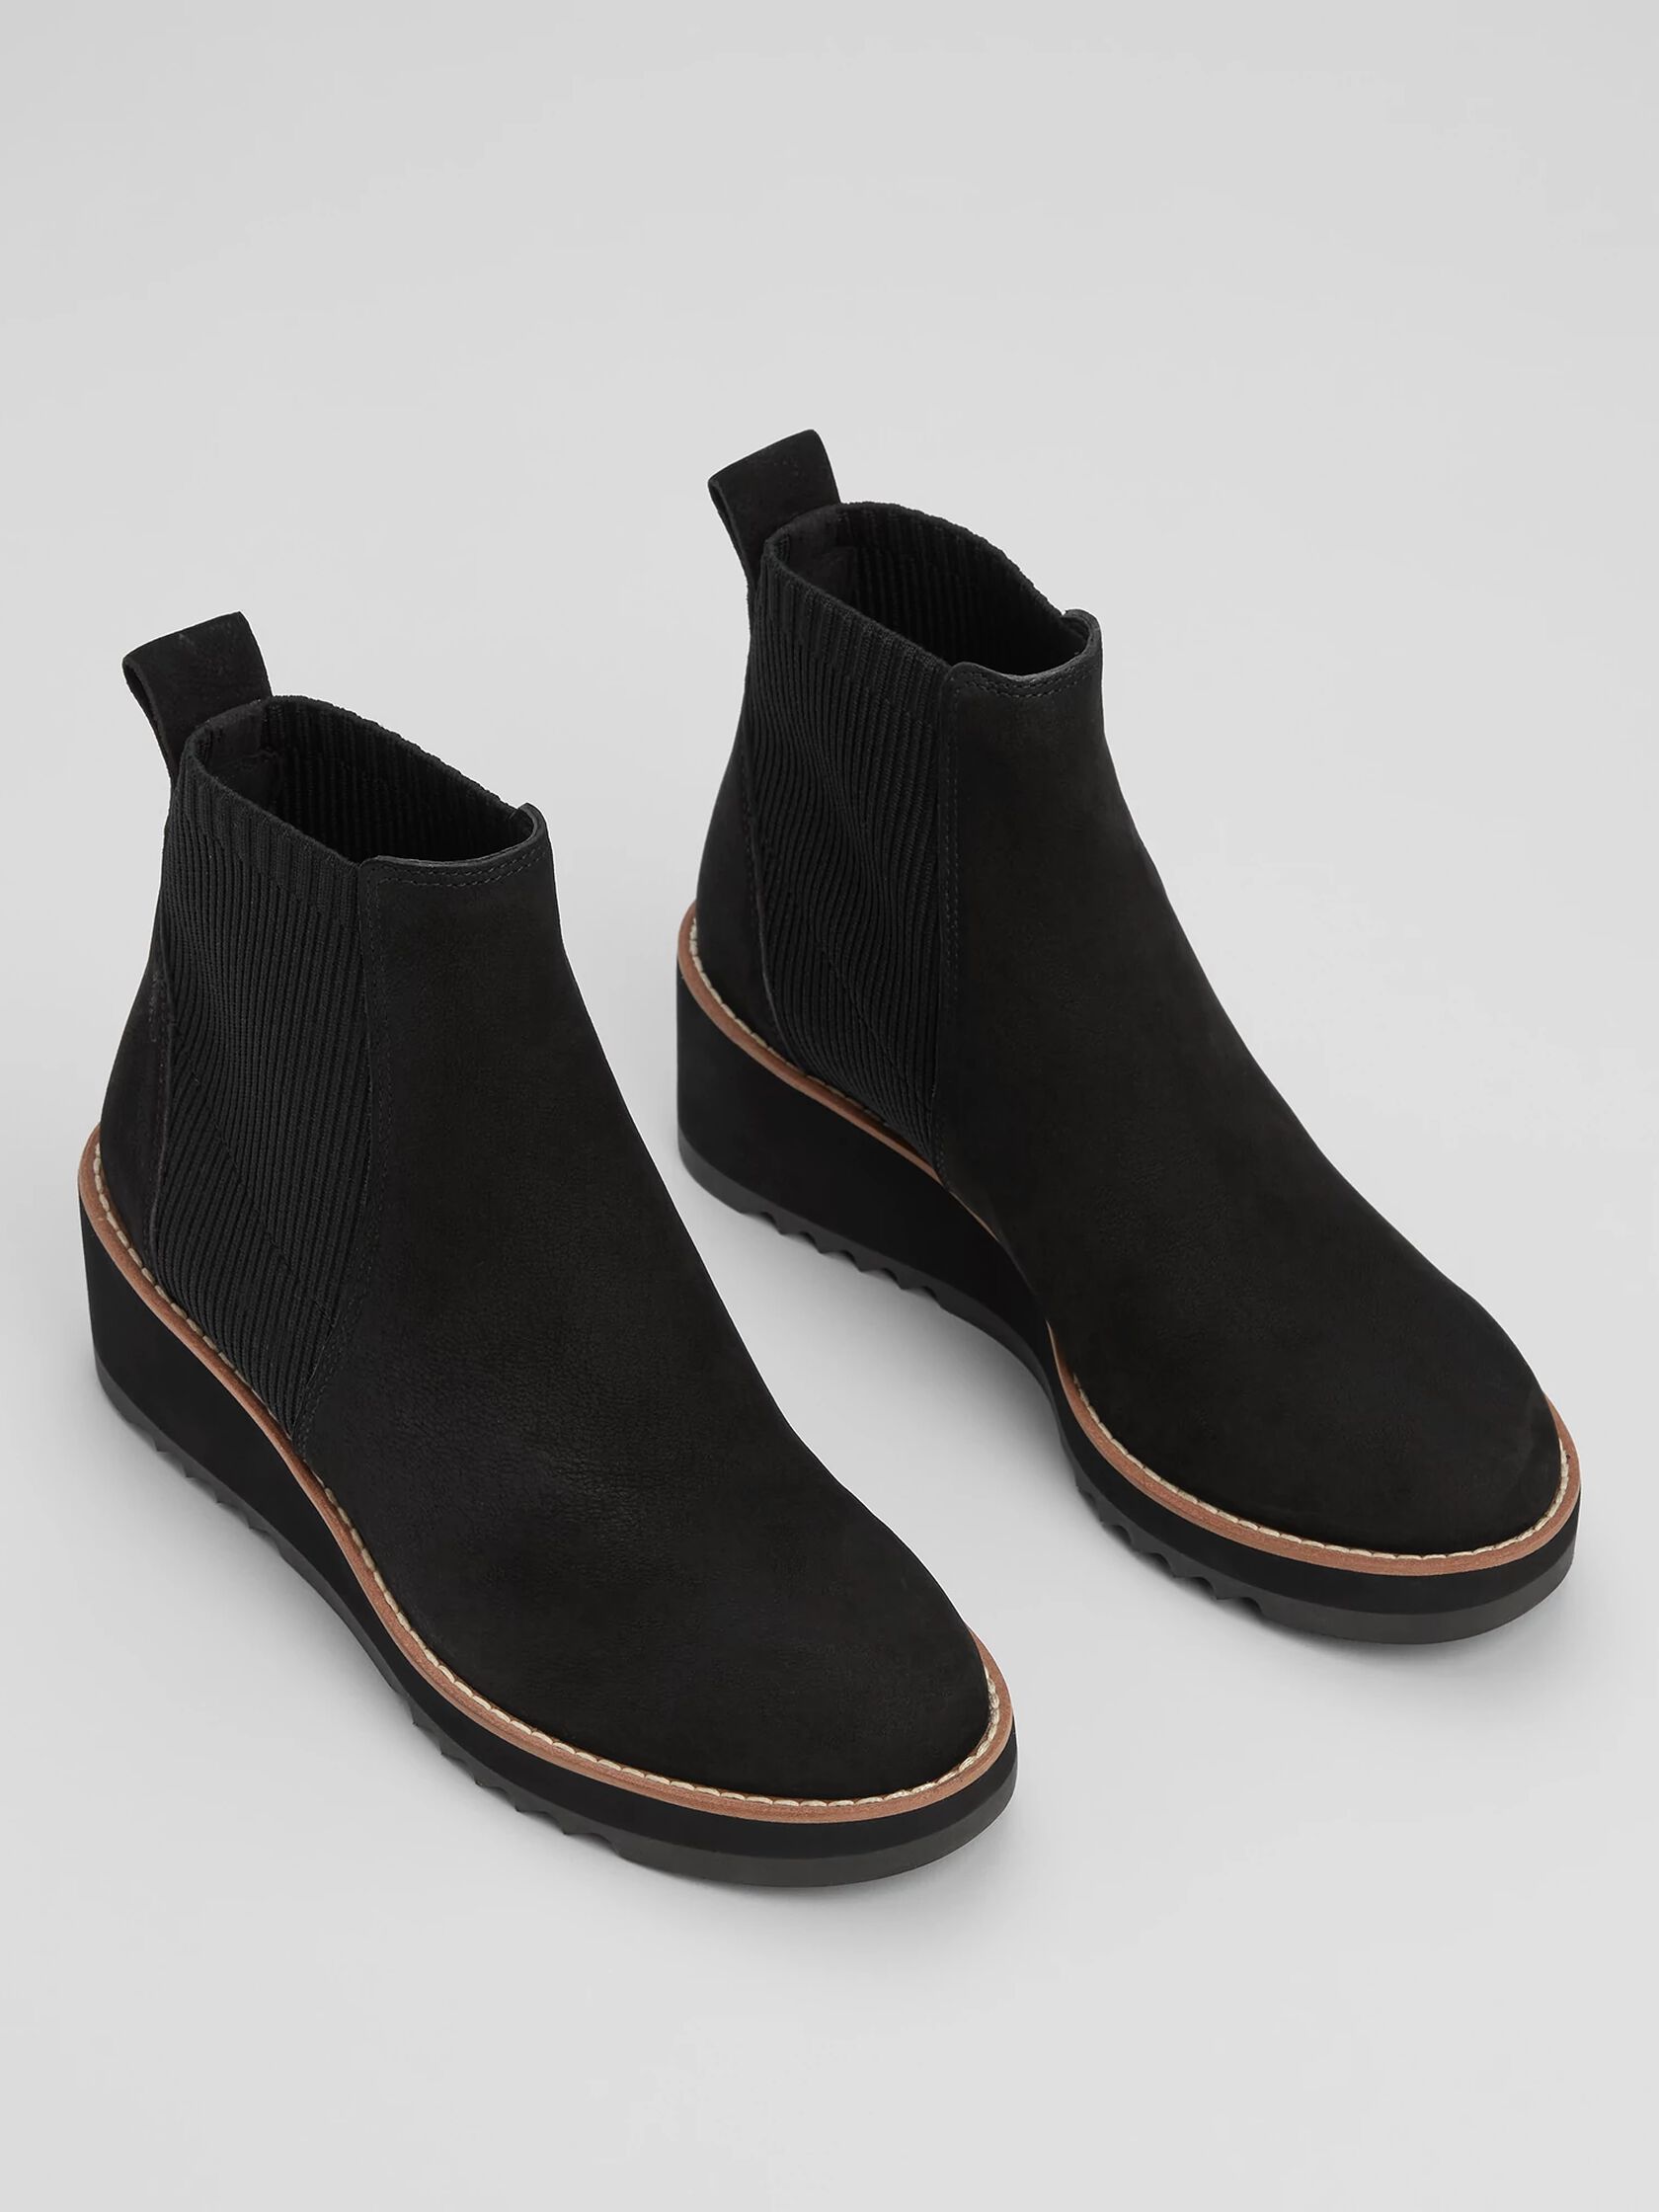 Lilou Nubuck and Recycled Stretch Knit Bootie